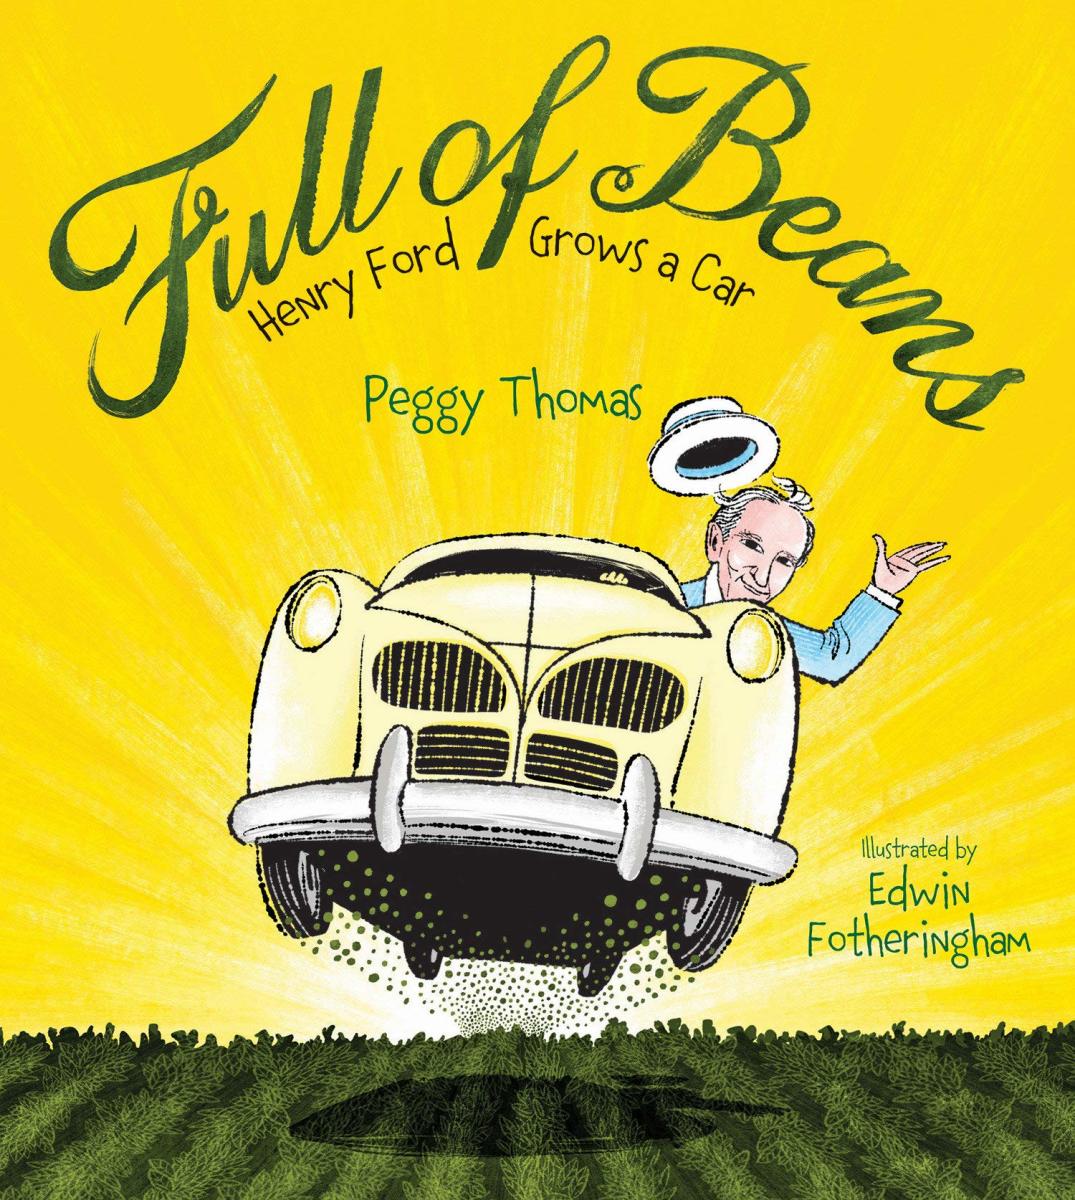 Full of Beans: Henry Ford Grows a Car by Peggy Thomas